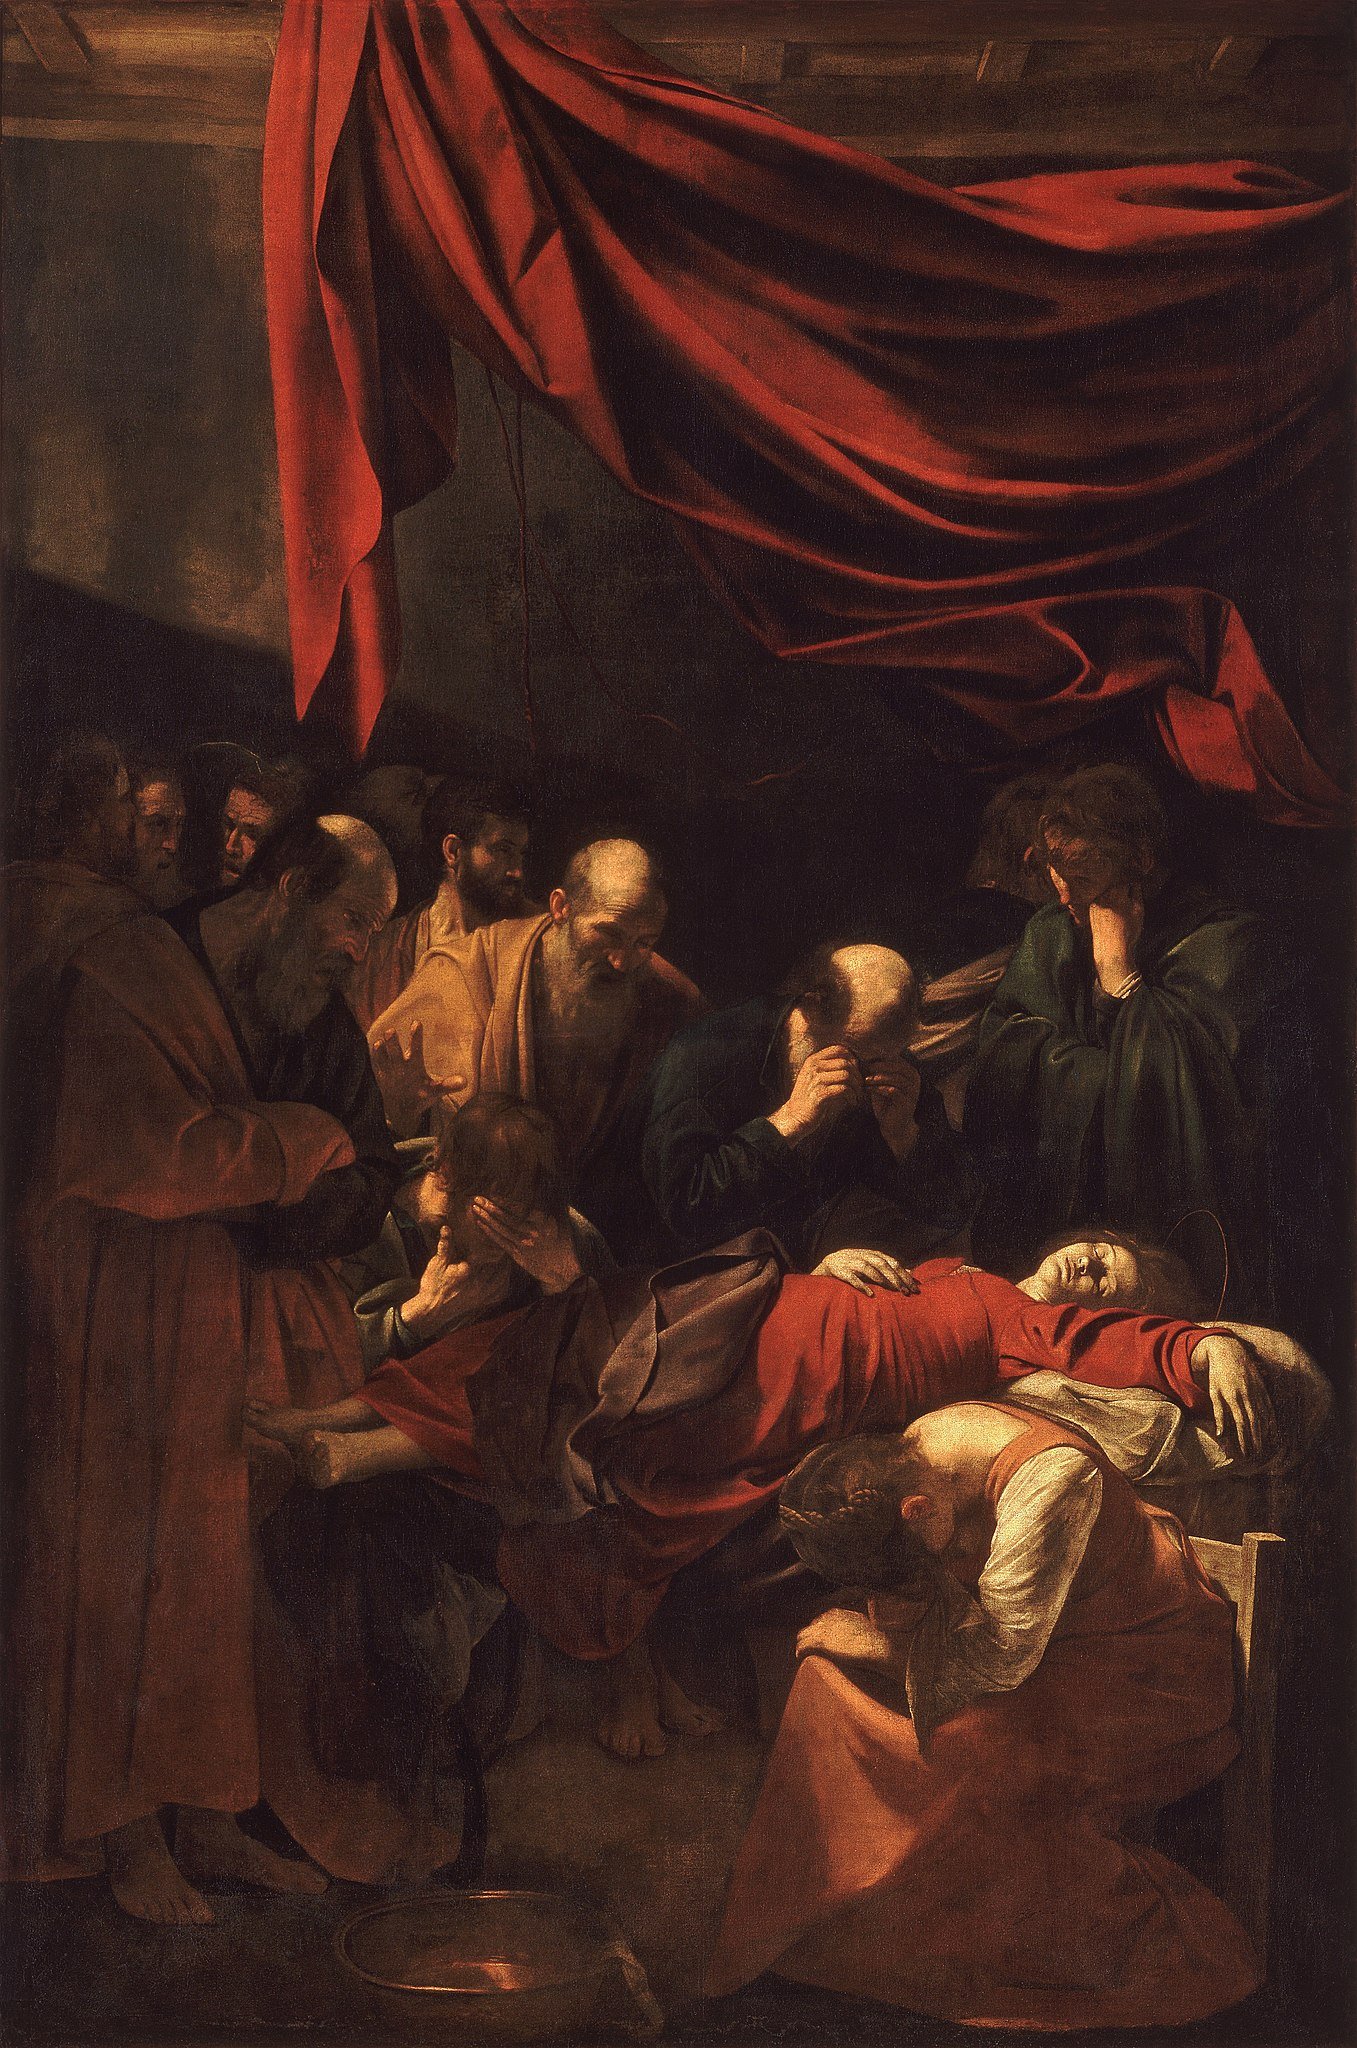 Caravaggio's painting presents a naturalistic portrayal of Mary in a red dress, capturing the raw realism of her mortal remains. Traditional indications of her holiness are abandoned.